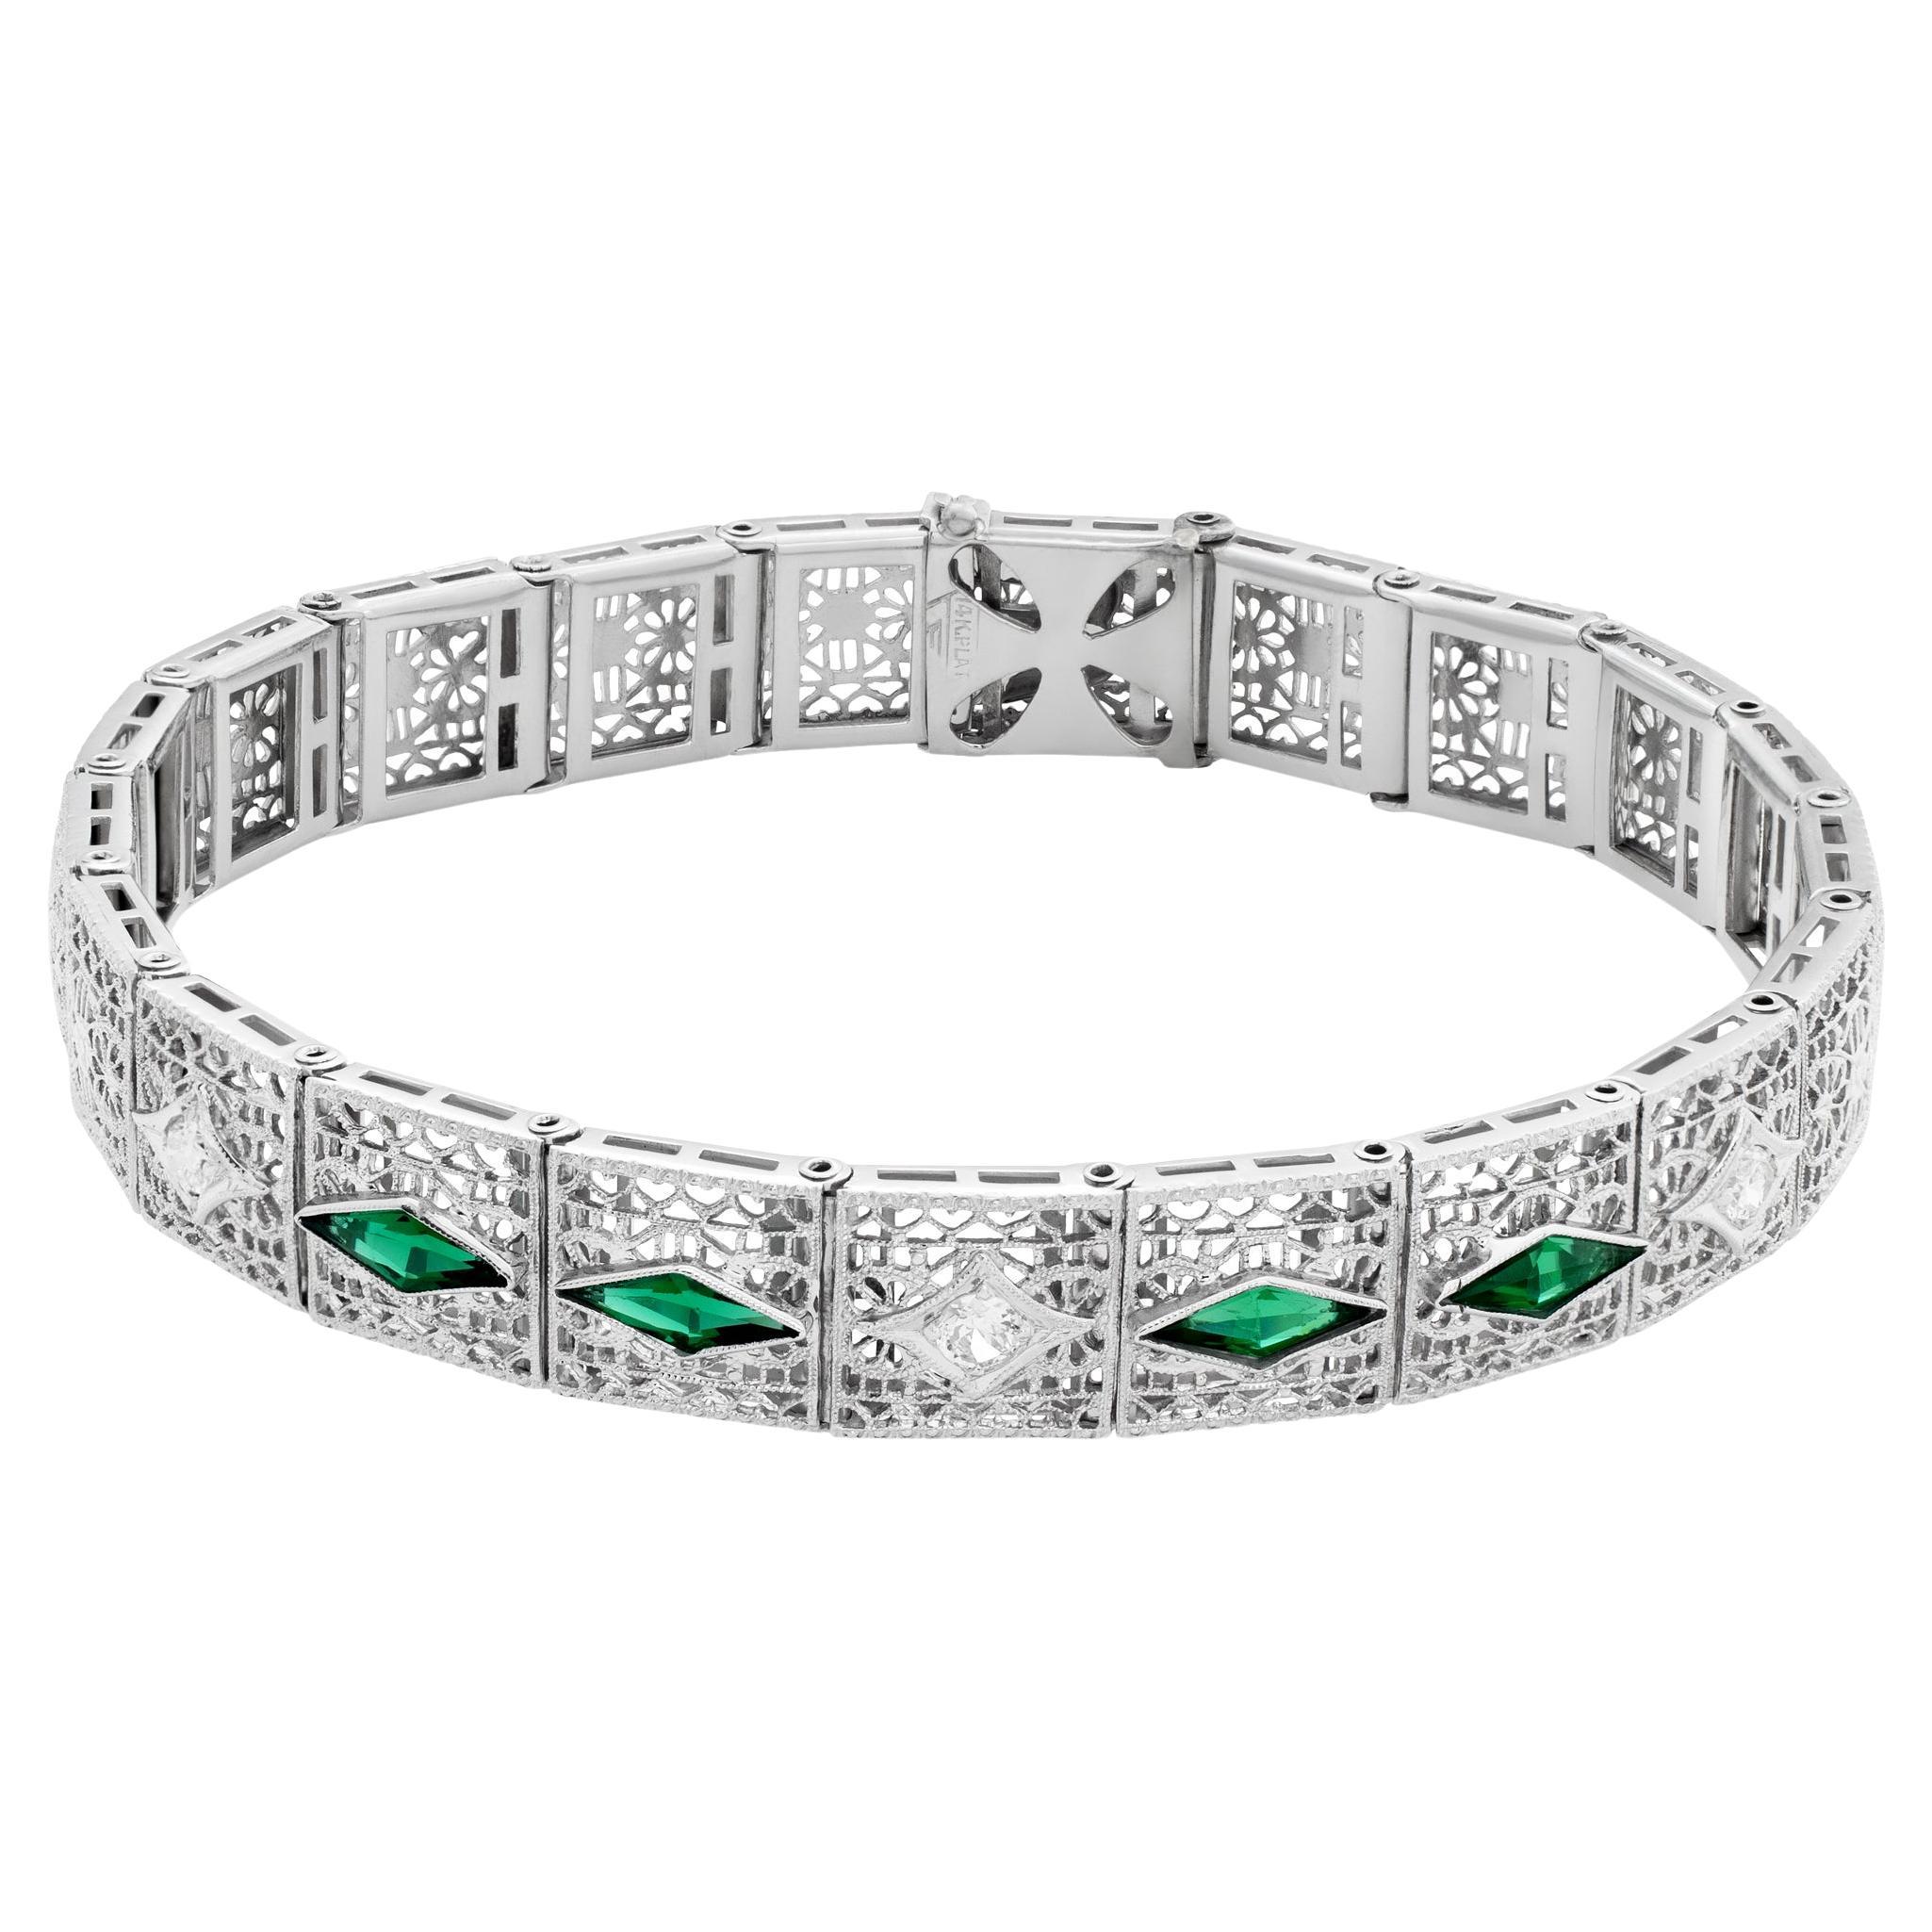 Emerald and diamond bracelet in 14k white gold with platinum top